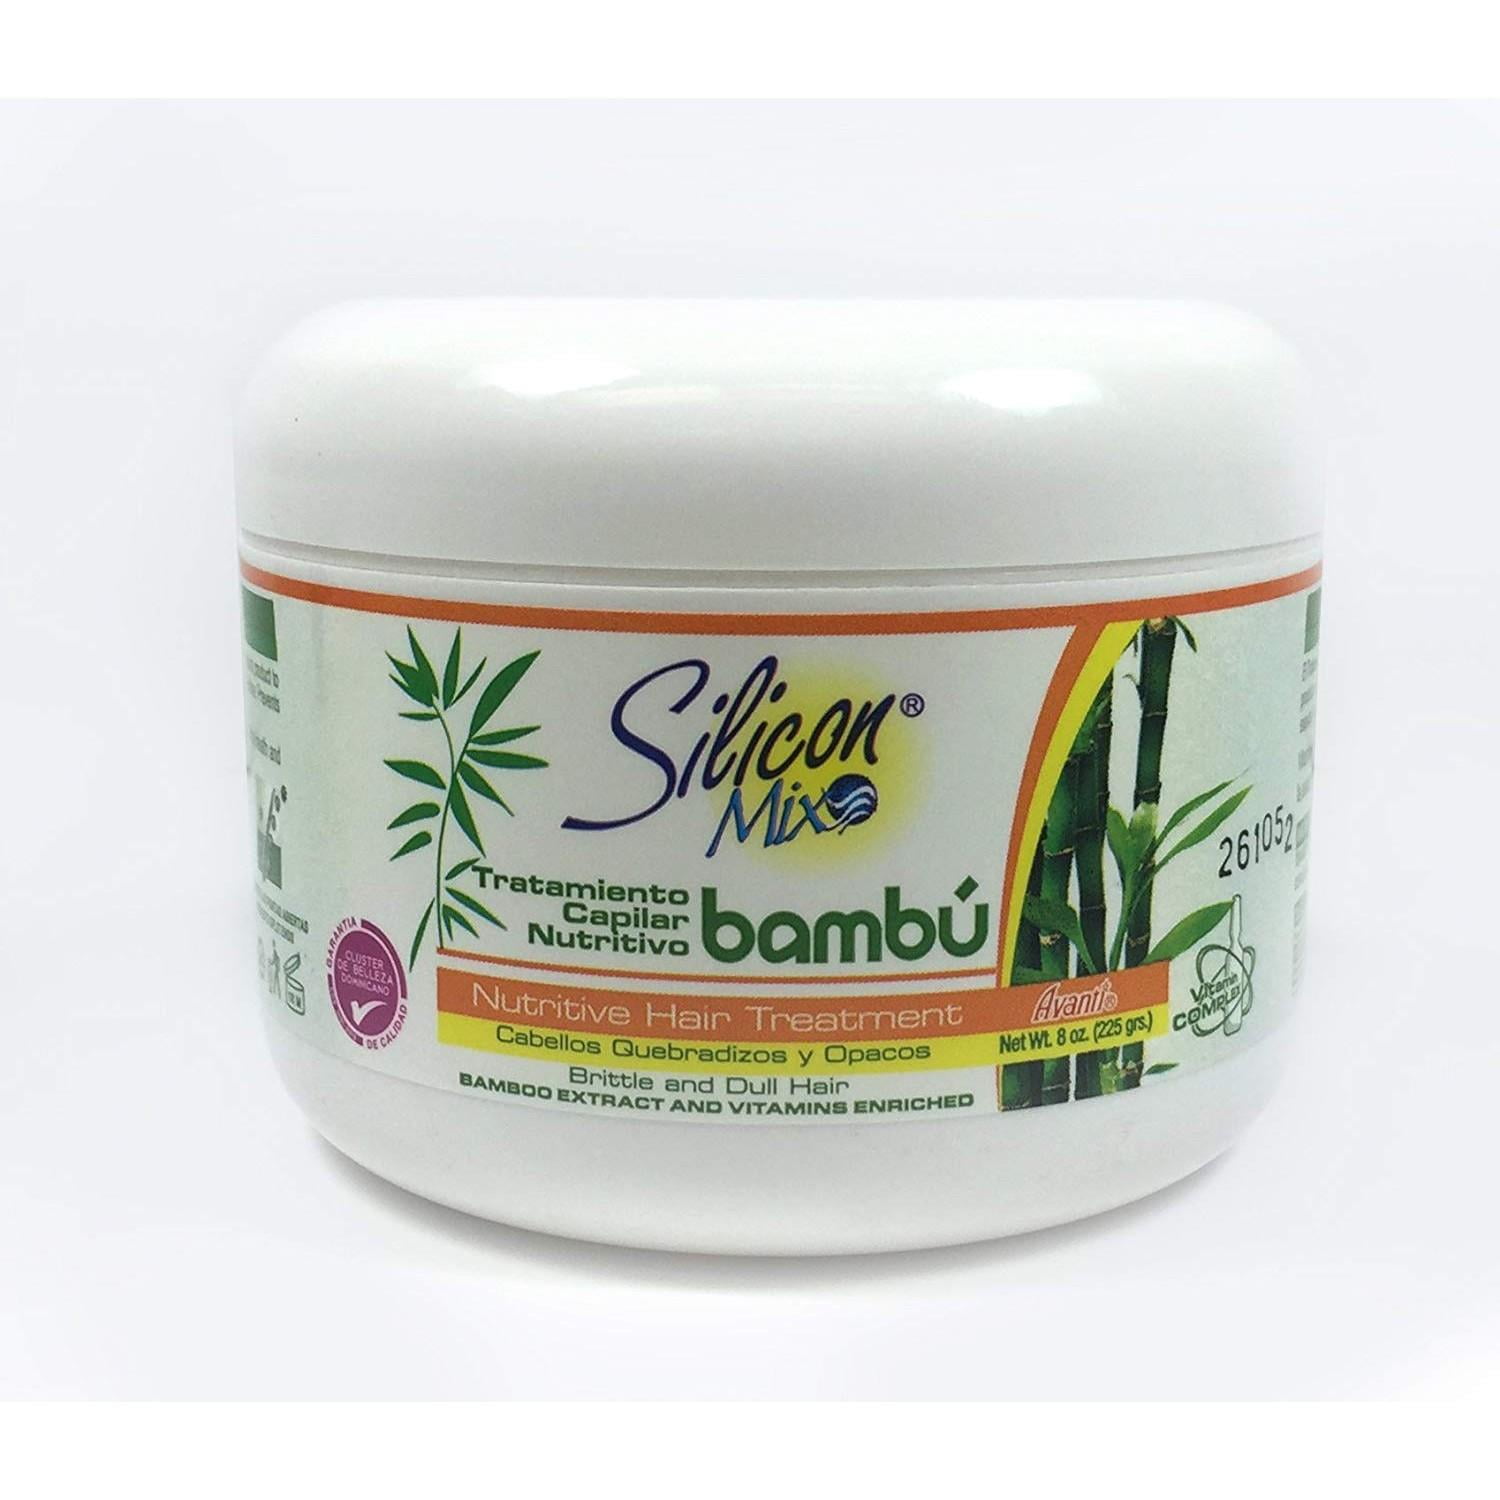 Silicon Mix Bamboo hair treatment 8 Oz.,Pack of 2 